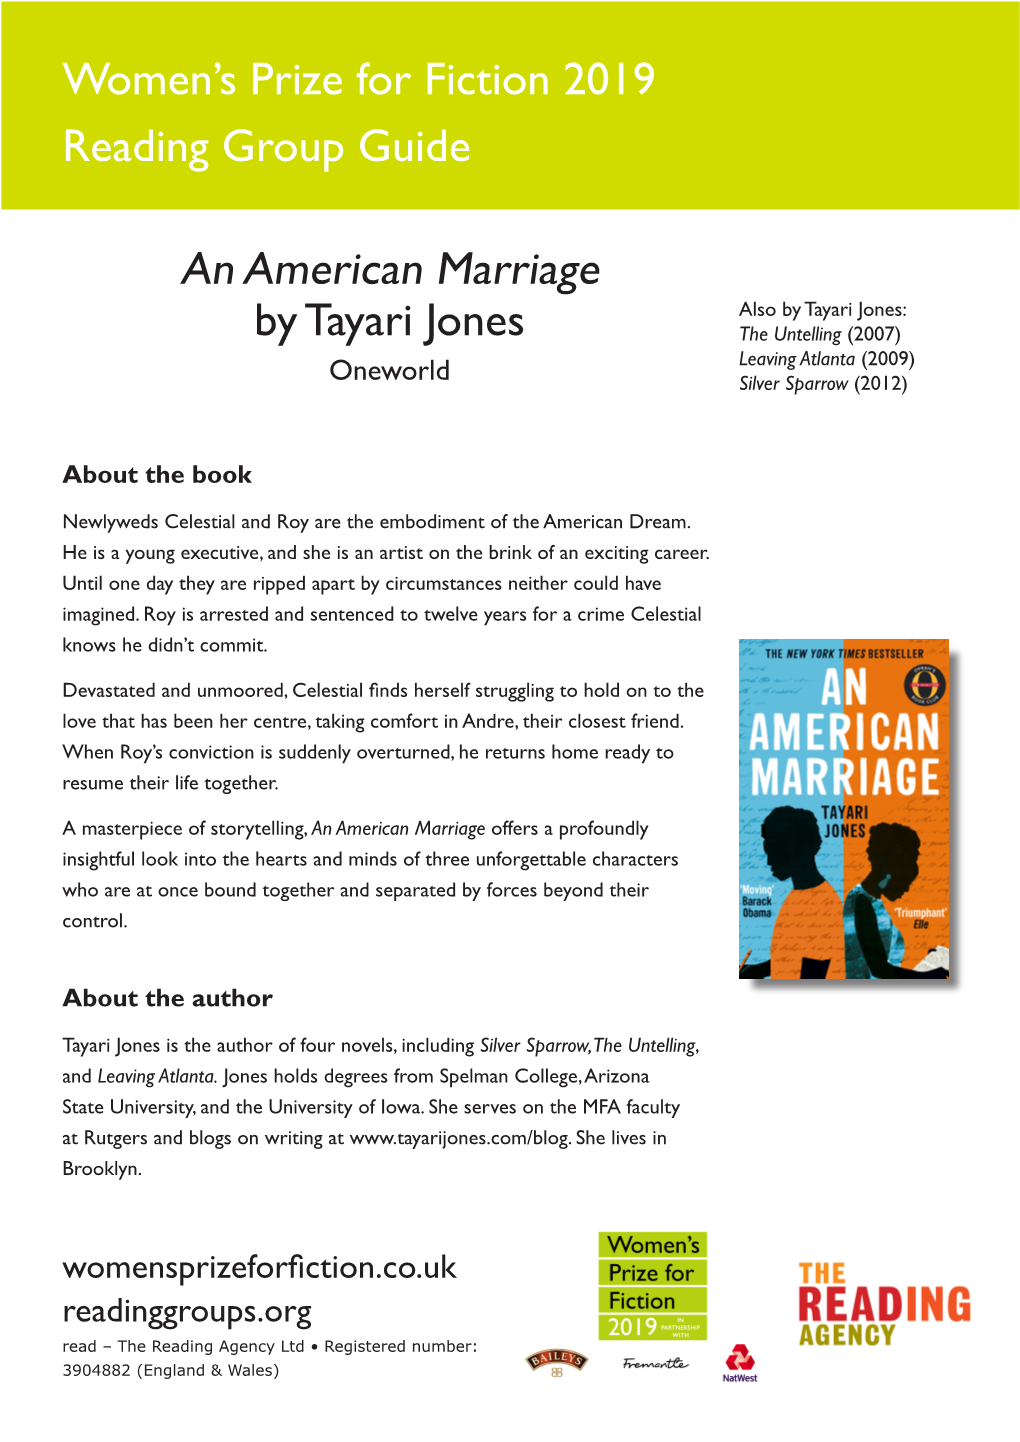 An American Marriage Readers' Guide